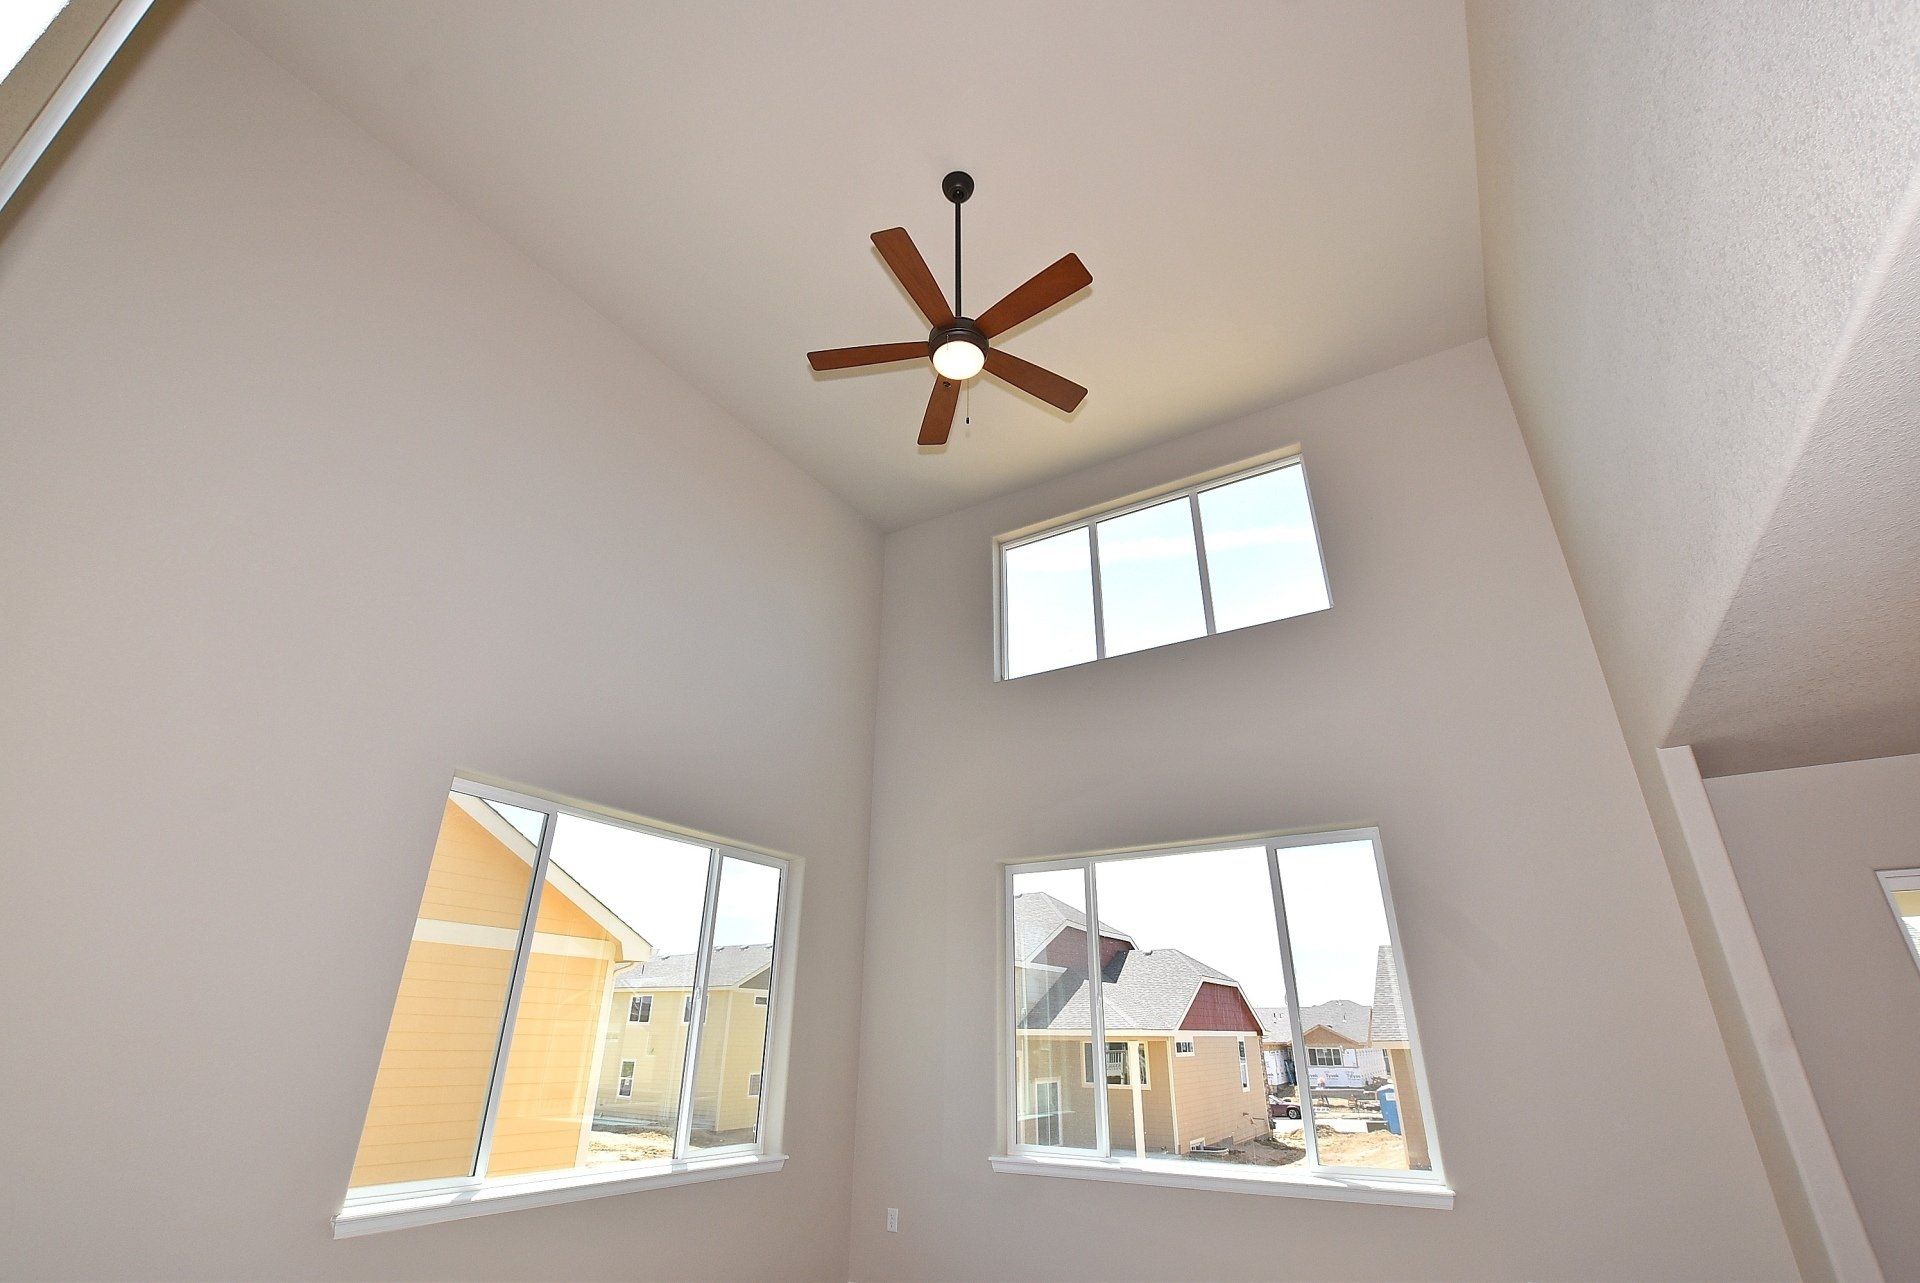 Large room with tall ceiling and fan